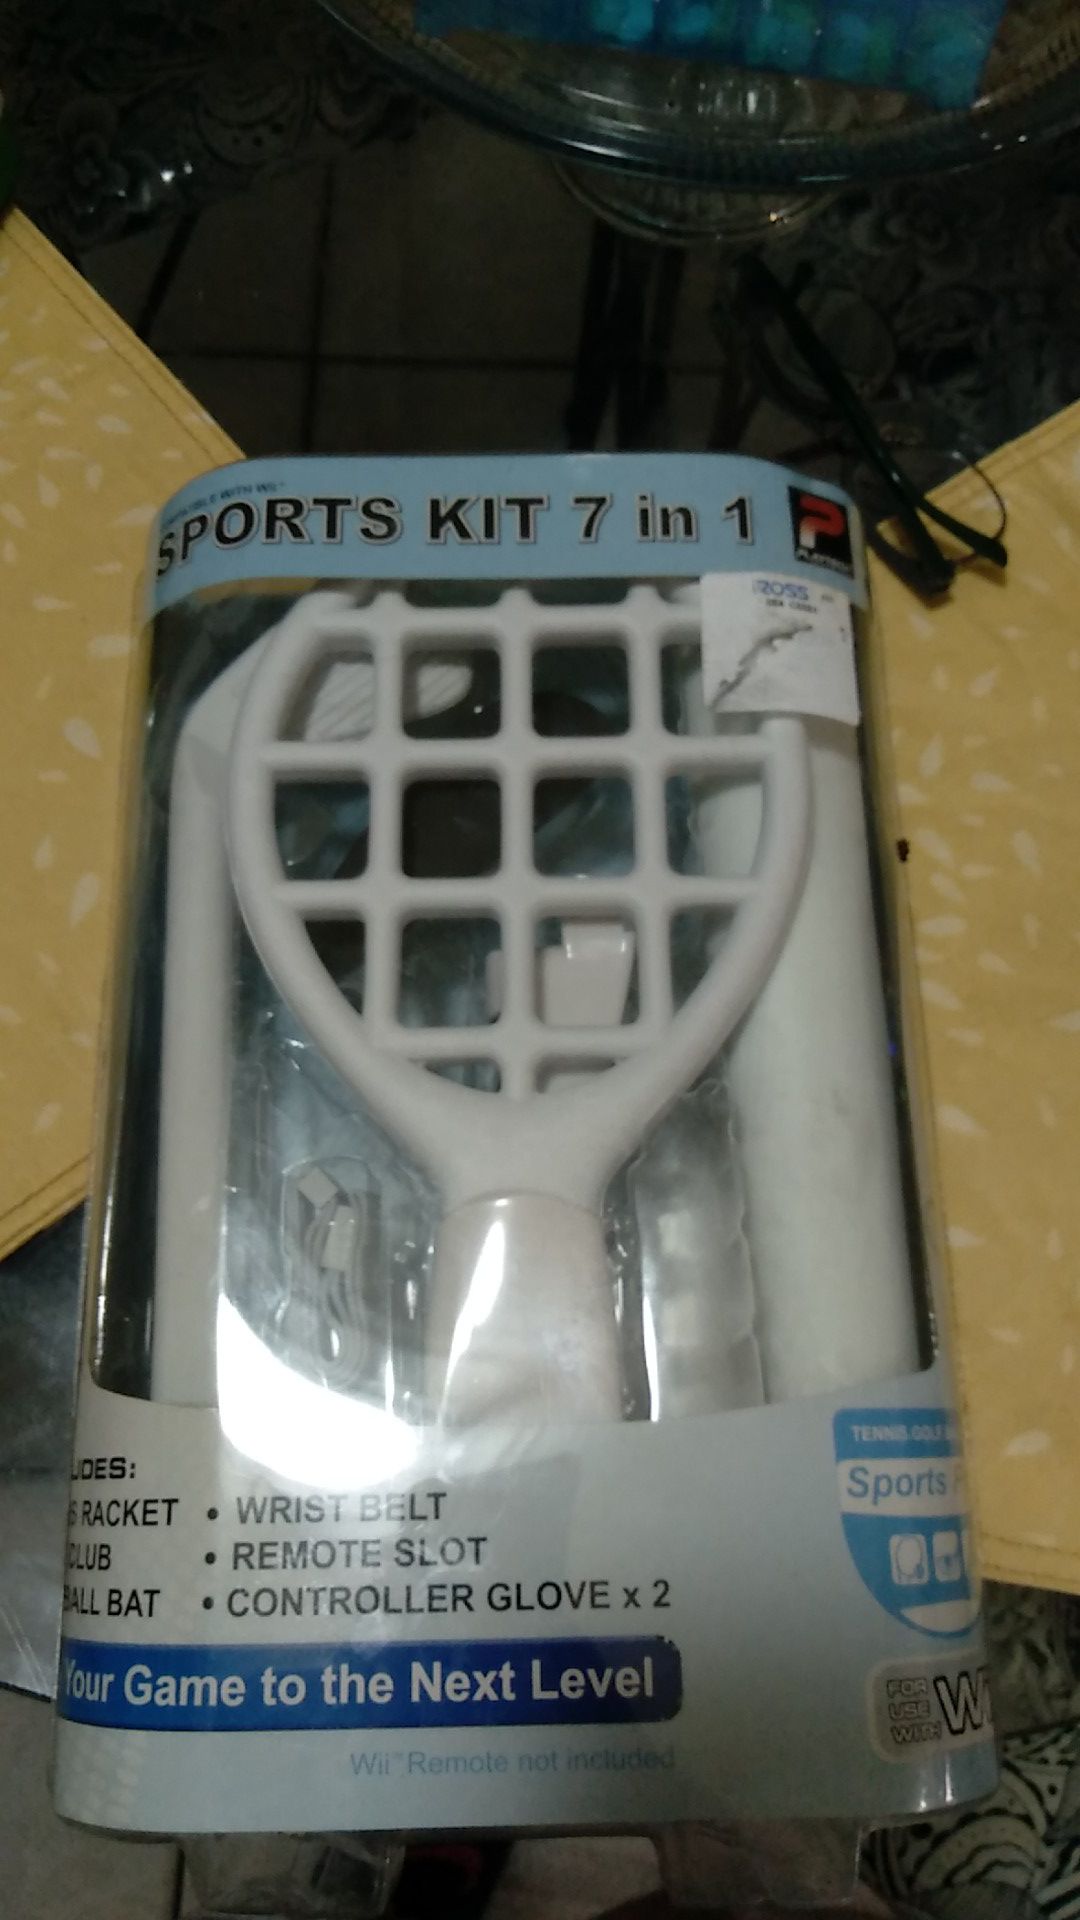 Wii sports kit 7 in 1